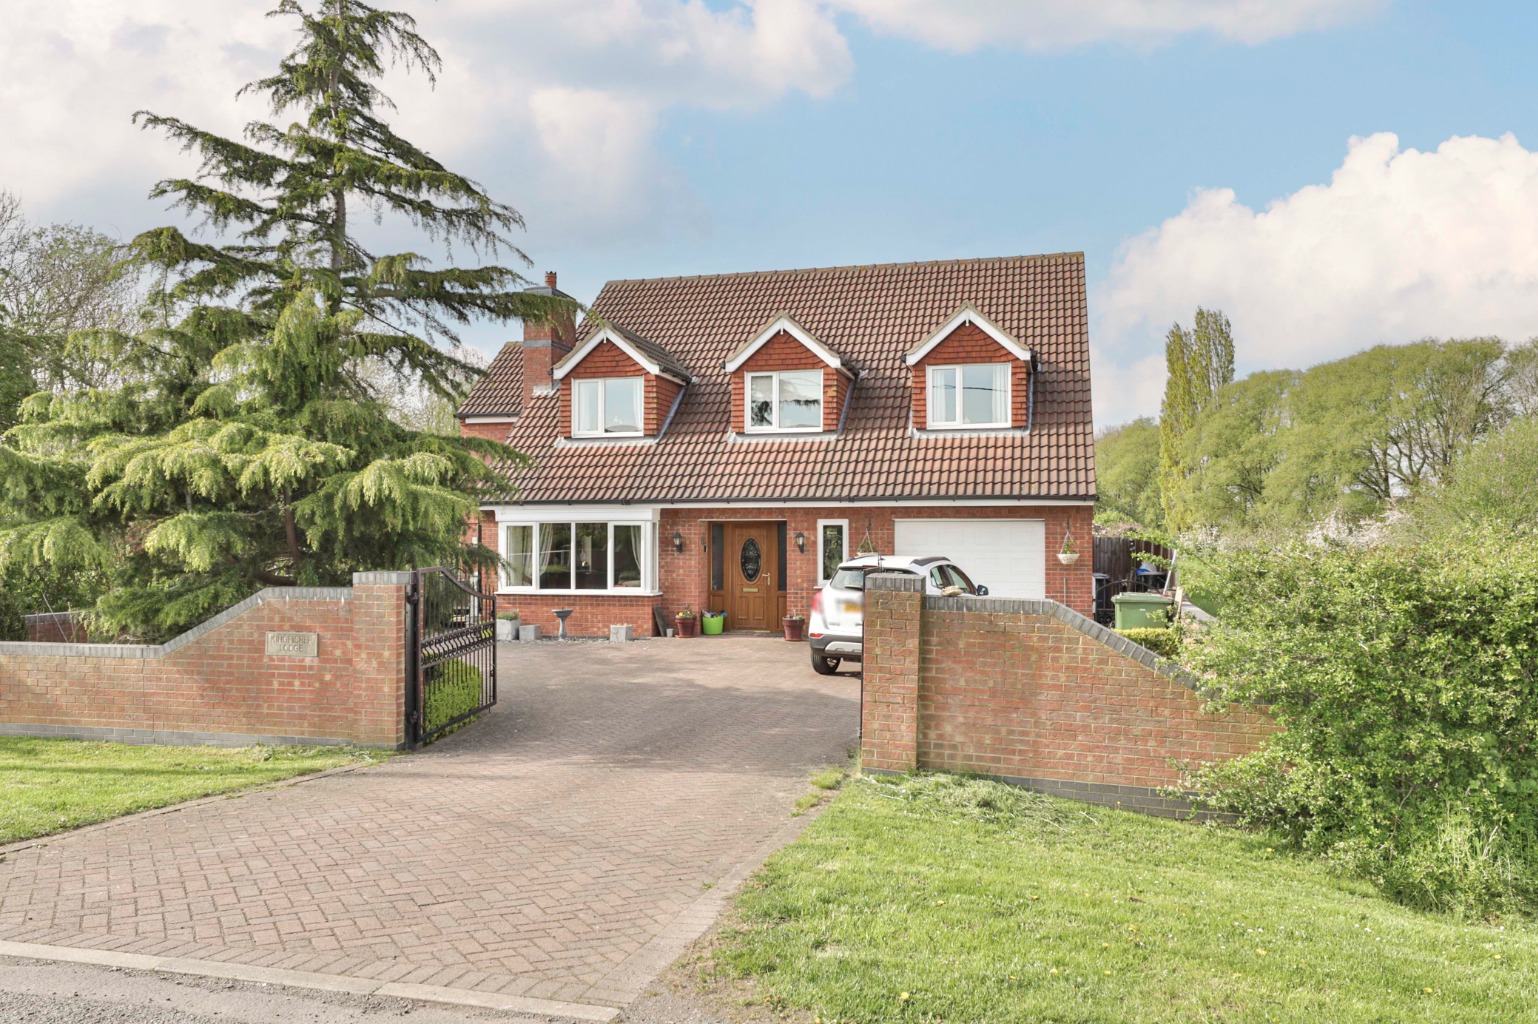 4 bed detached house for sale in Marsh Lane, Barrow upon Humber  - Property Image 1